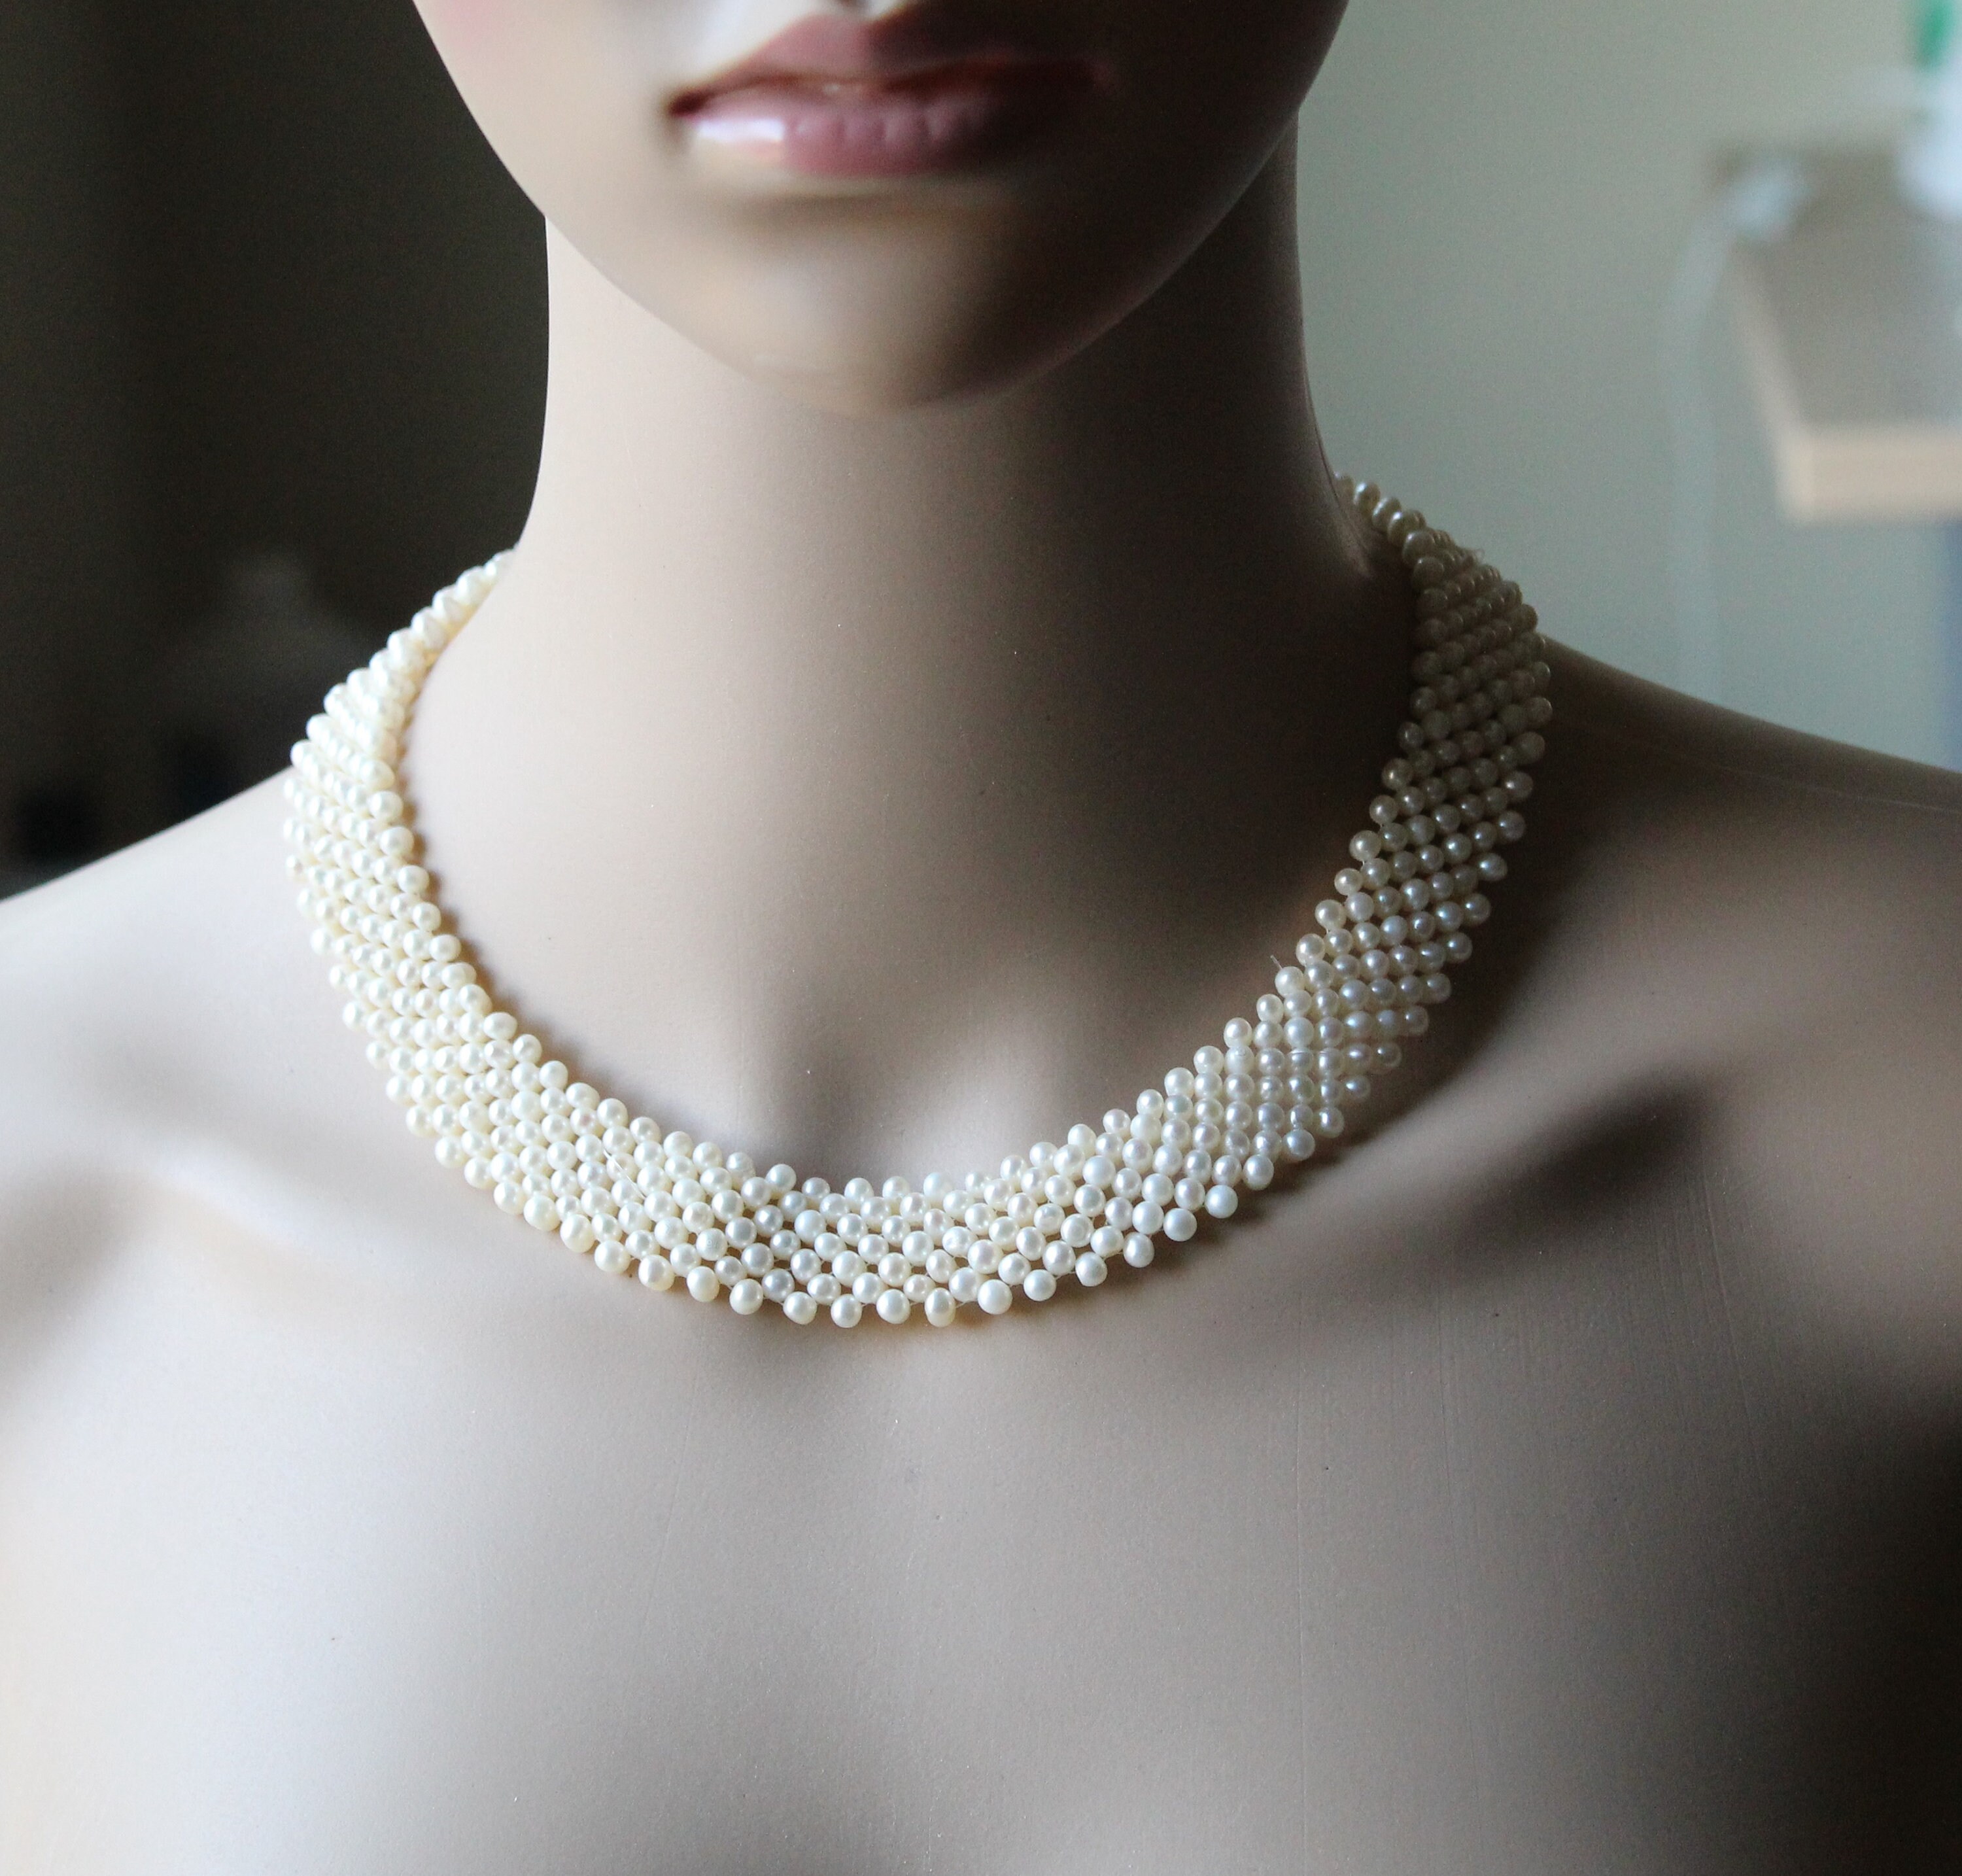 Freshwater Pearl Necklace - Vintage Necklace